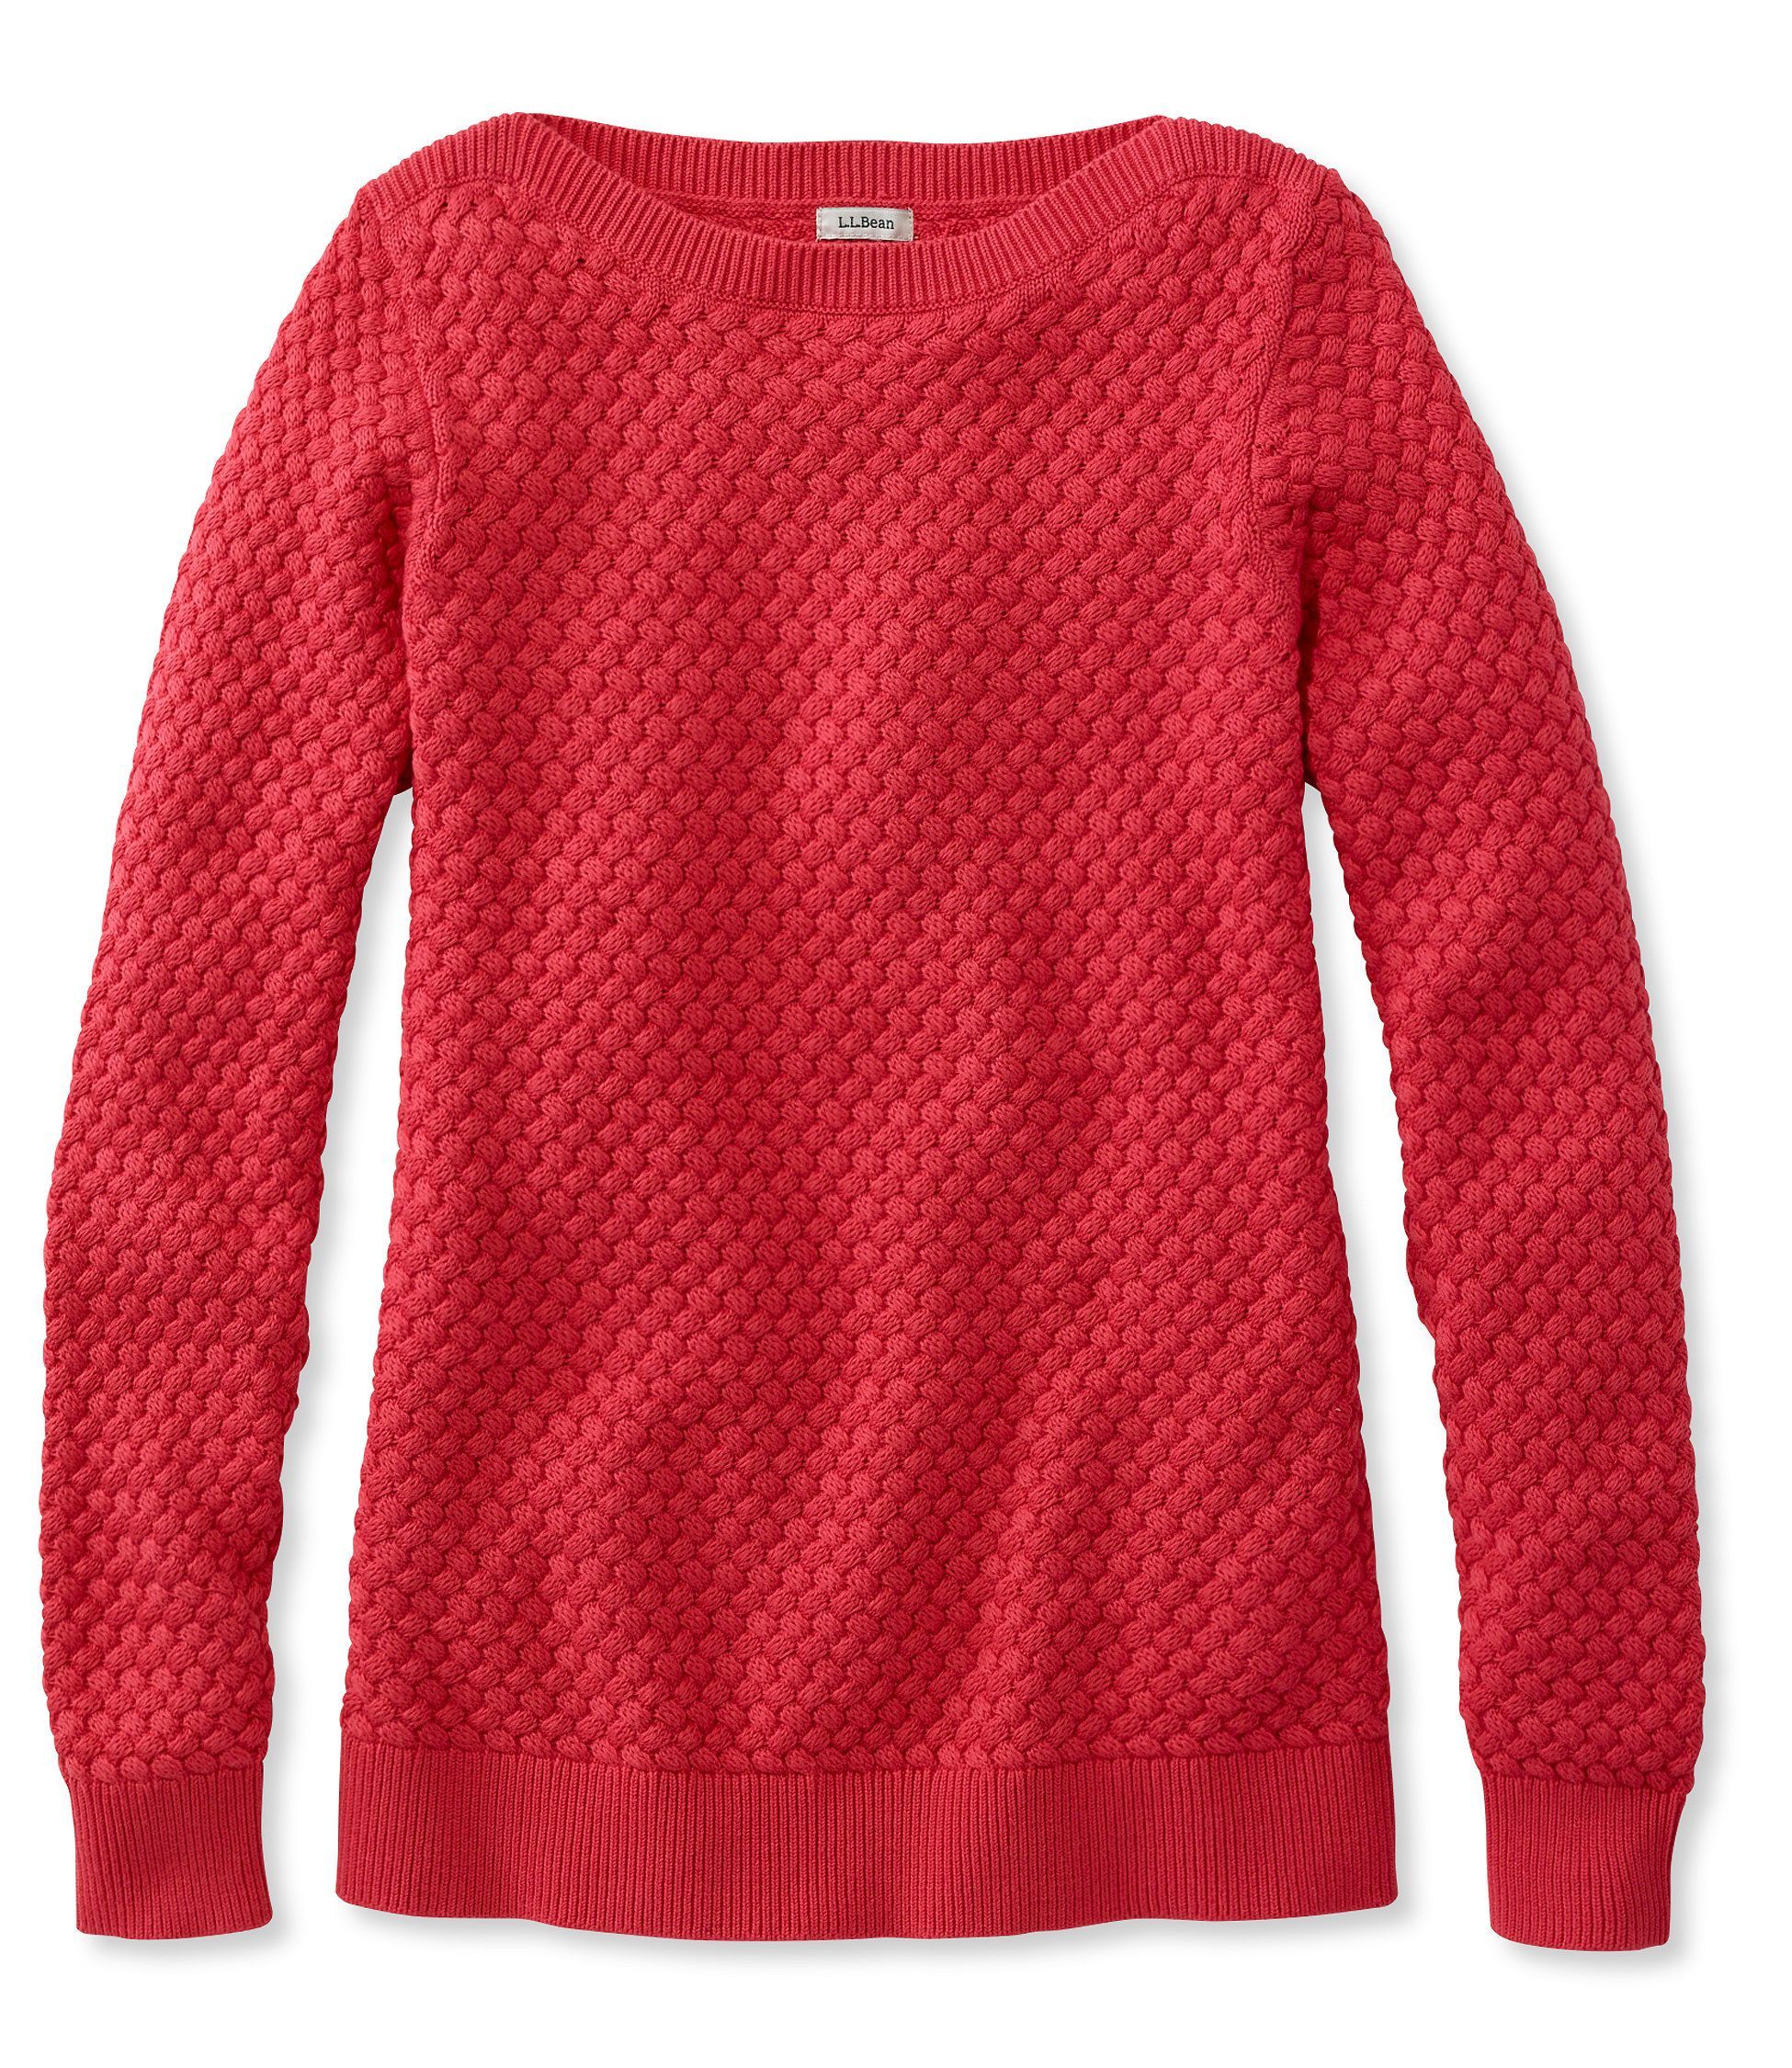 Cotton Basket-Weave Sweater | Pullover, Cotton and Free shipping